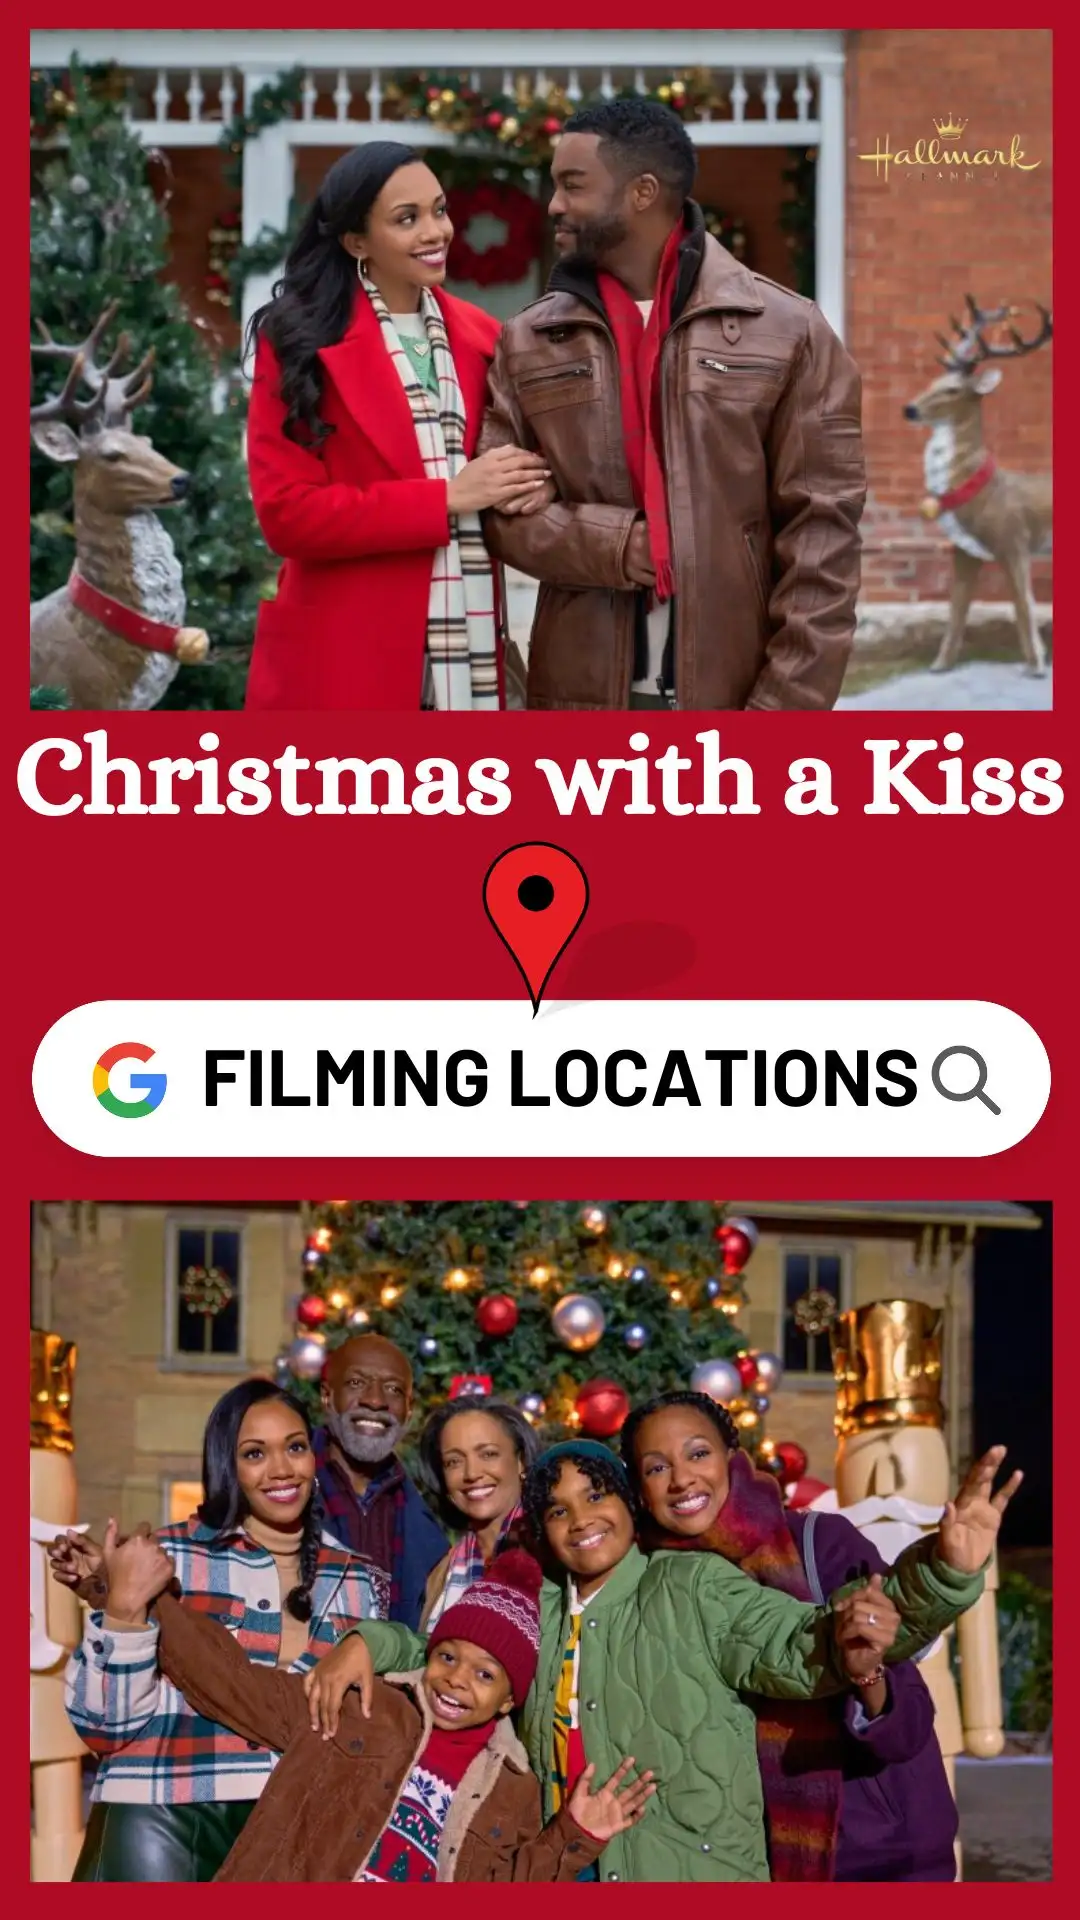 Christmas with a Kiss Filming Locations